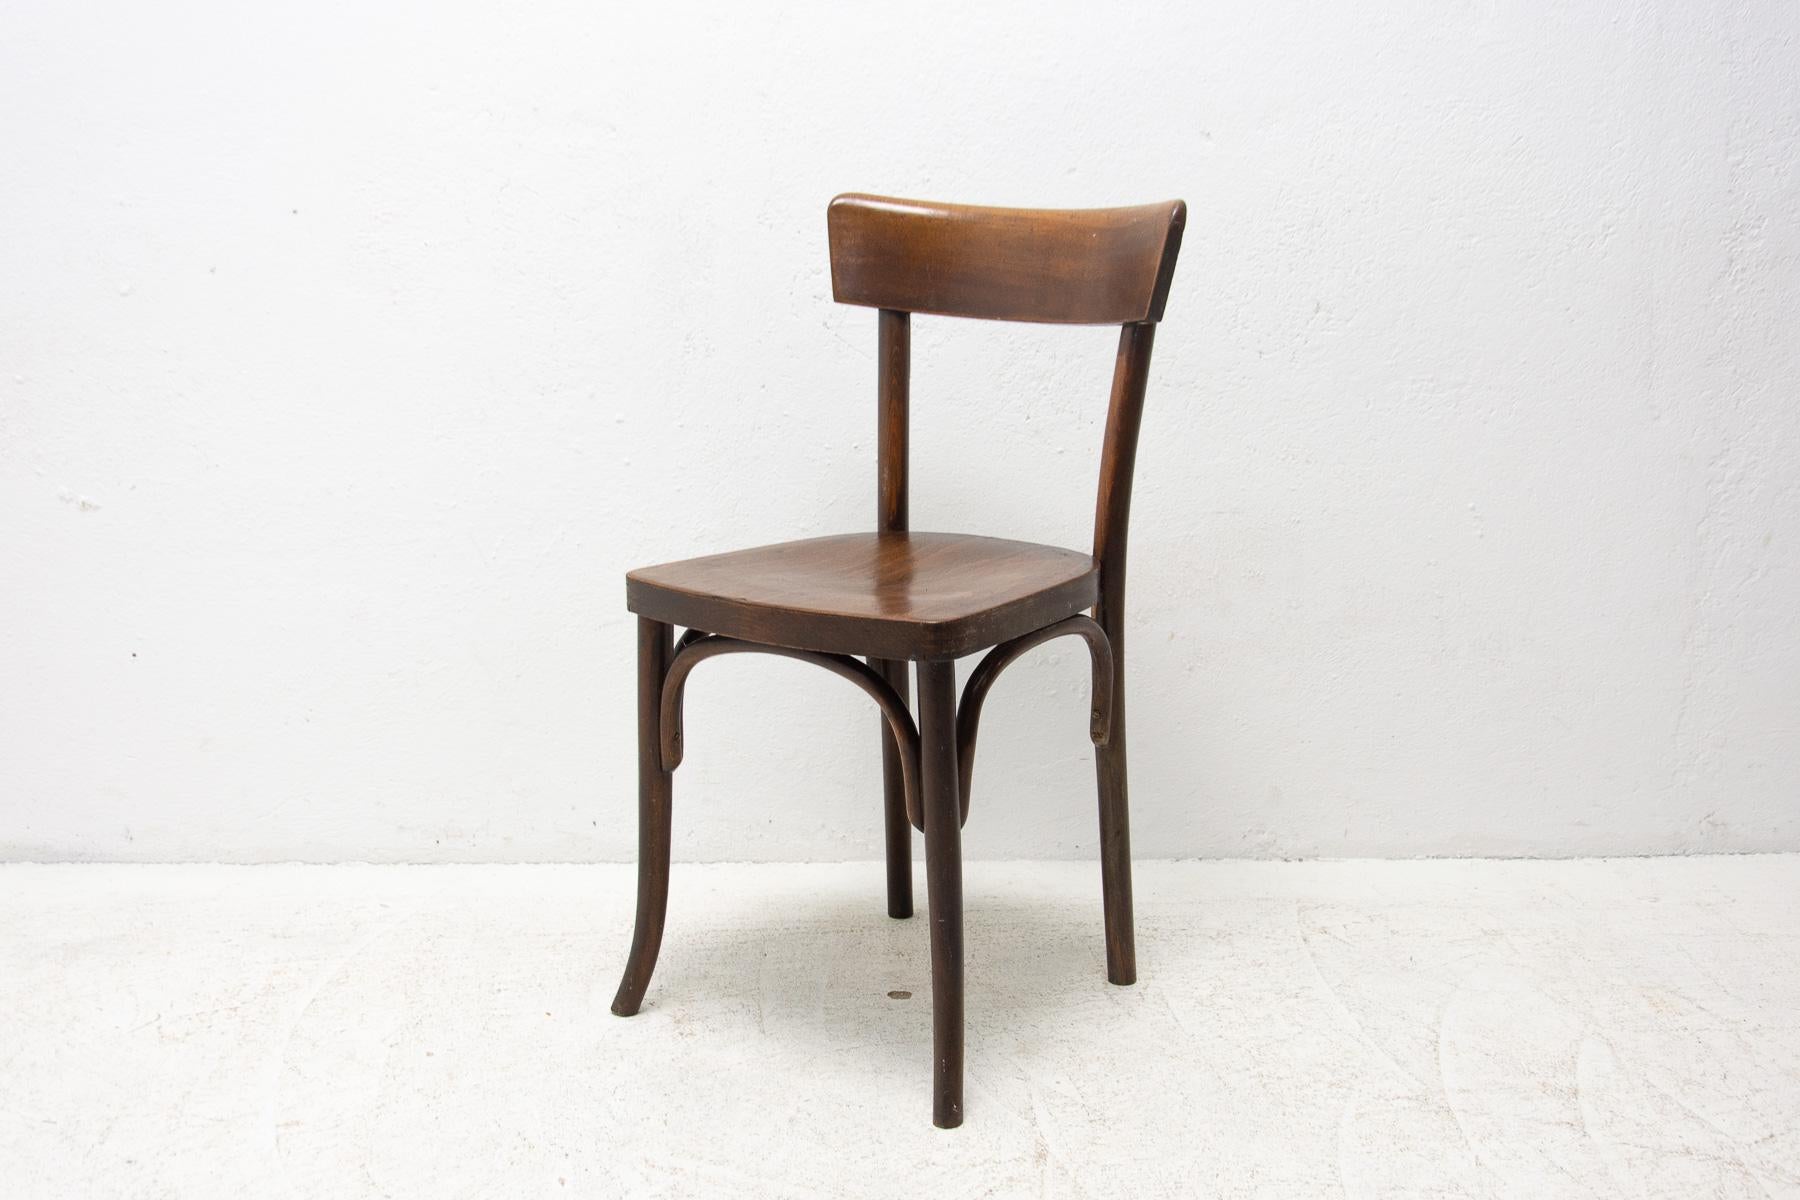 Dining chairs Thonet, made in the Czechoslovakia in the 1920´s. It´s made walnut. In very good Vintage condition, showing signs of age and using.

Measures: Height: 82 cm

Seat: 40 x 40 cm

Seat height: 46 cm.